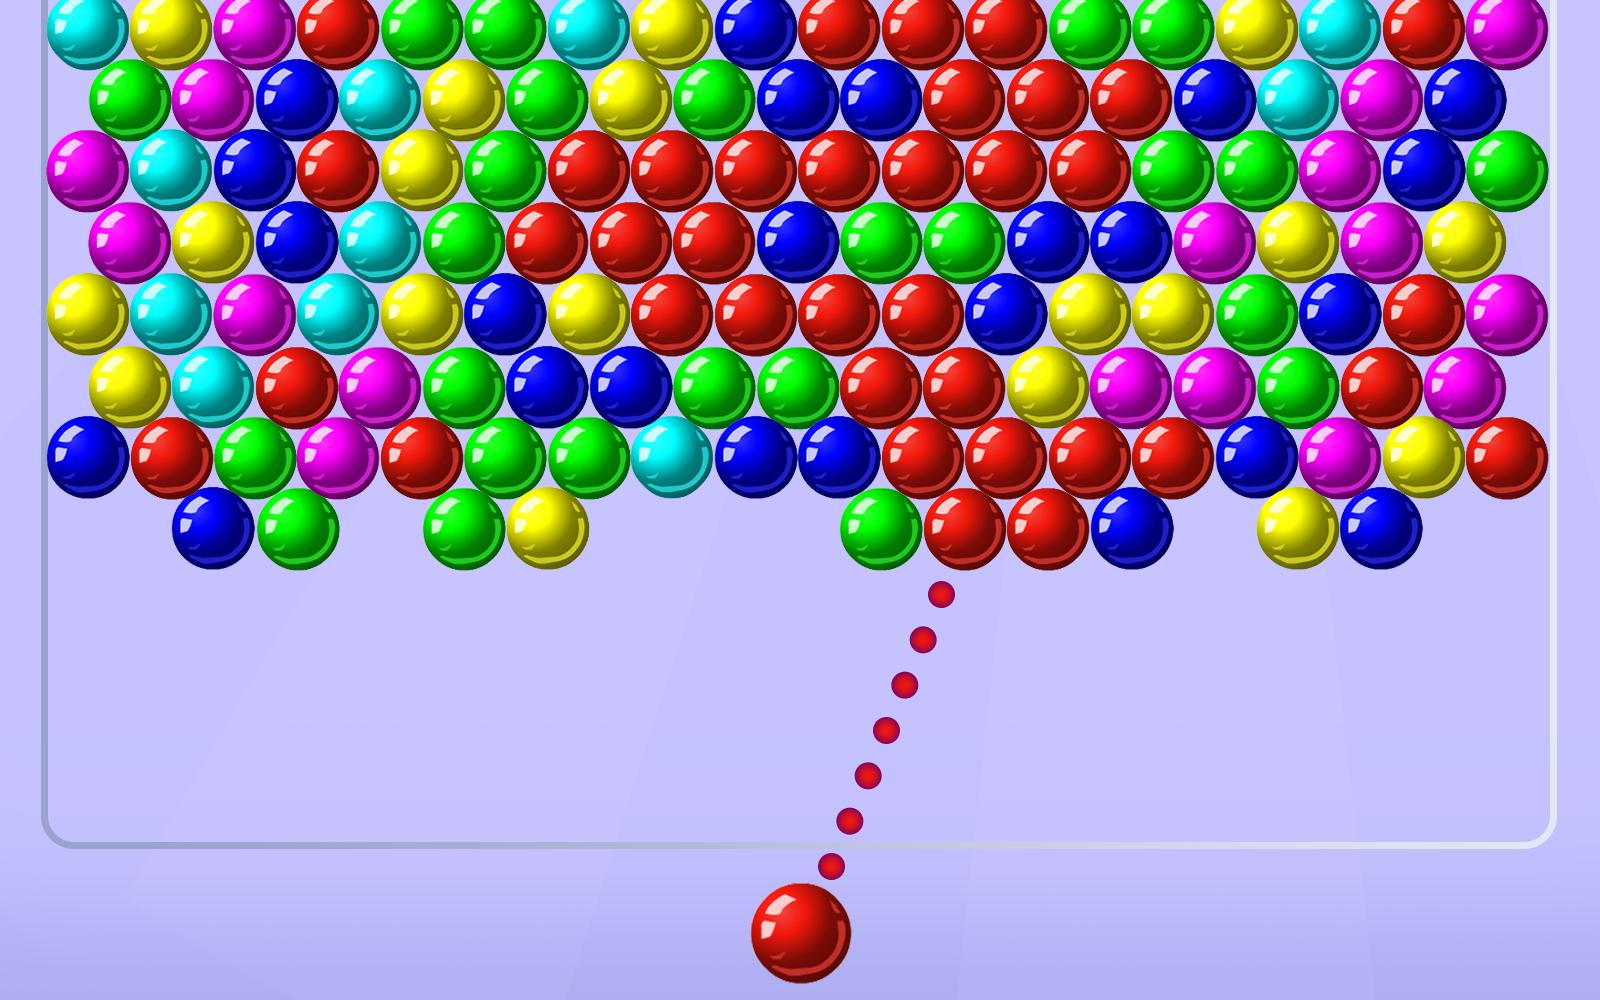 bubble shooter games free online no download